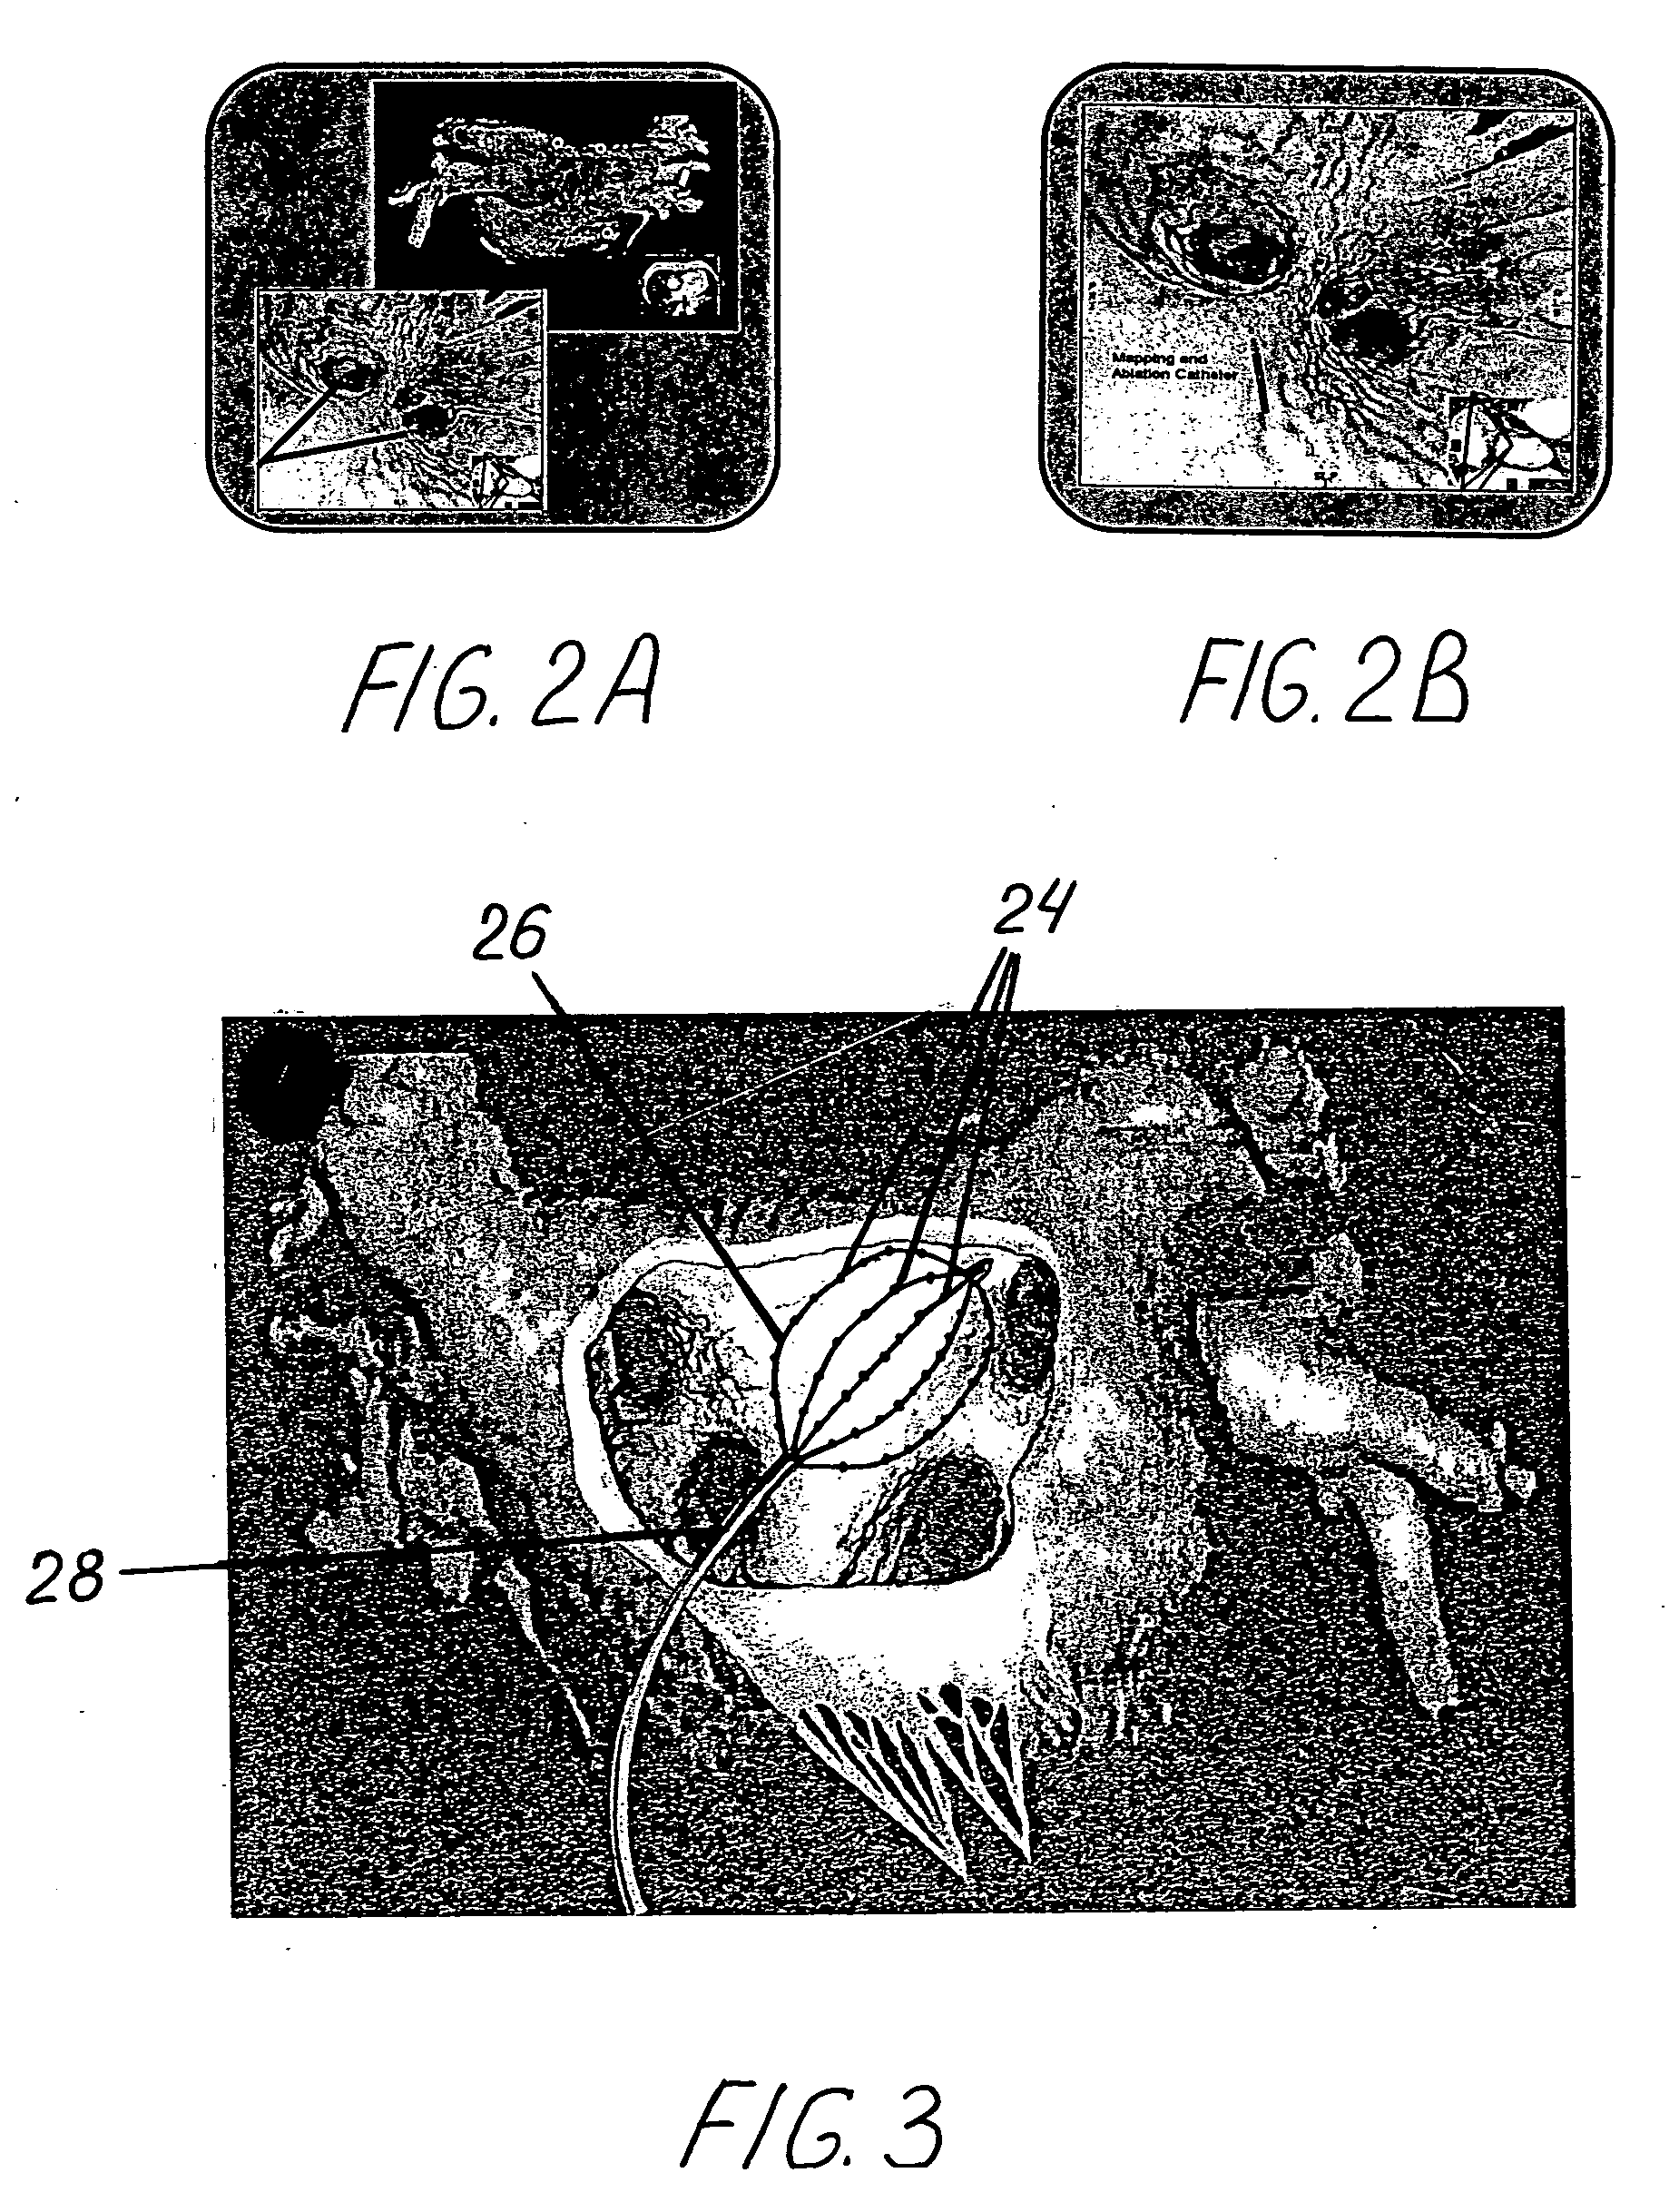 Method and system for ablation of atrial fibrillation and other cardiac arrhythmias